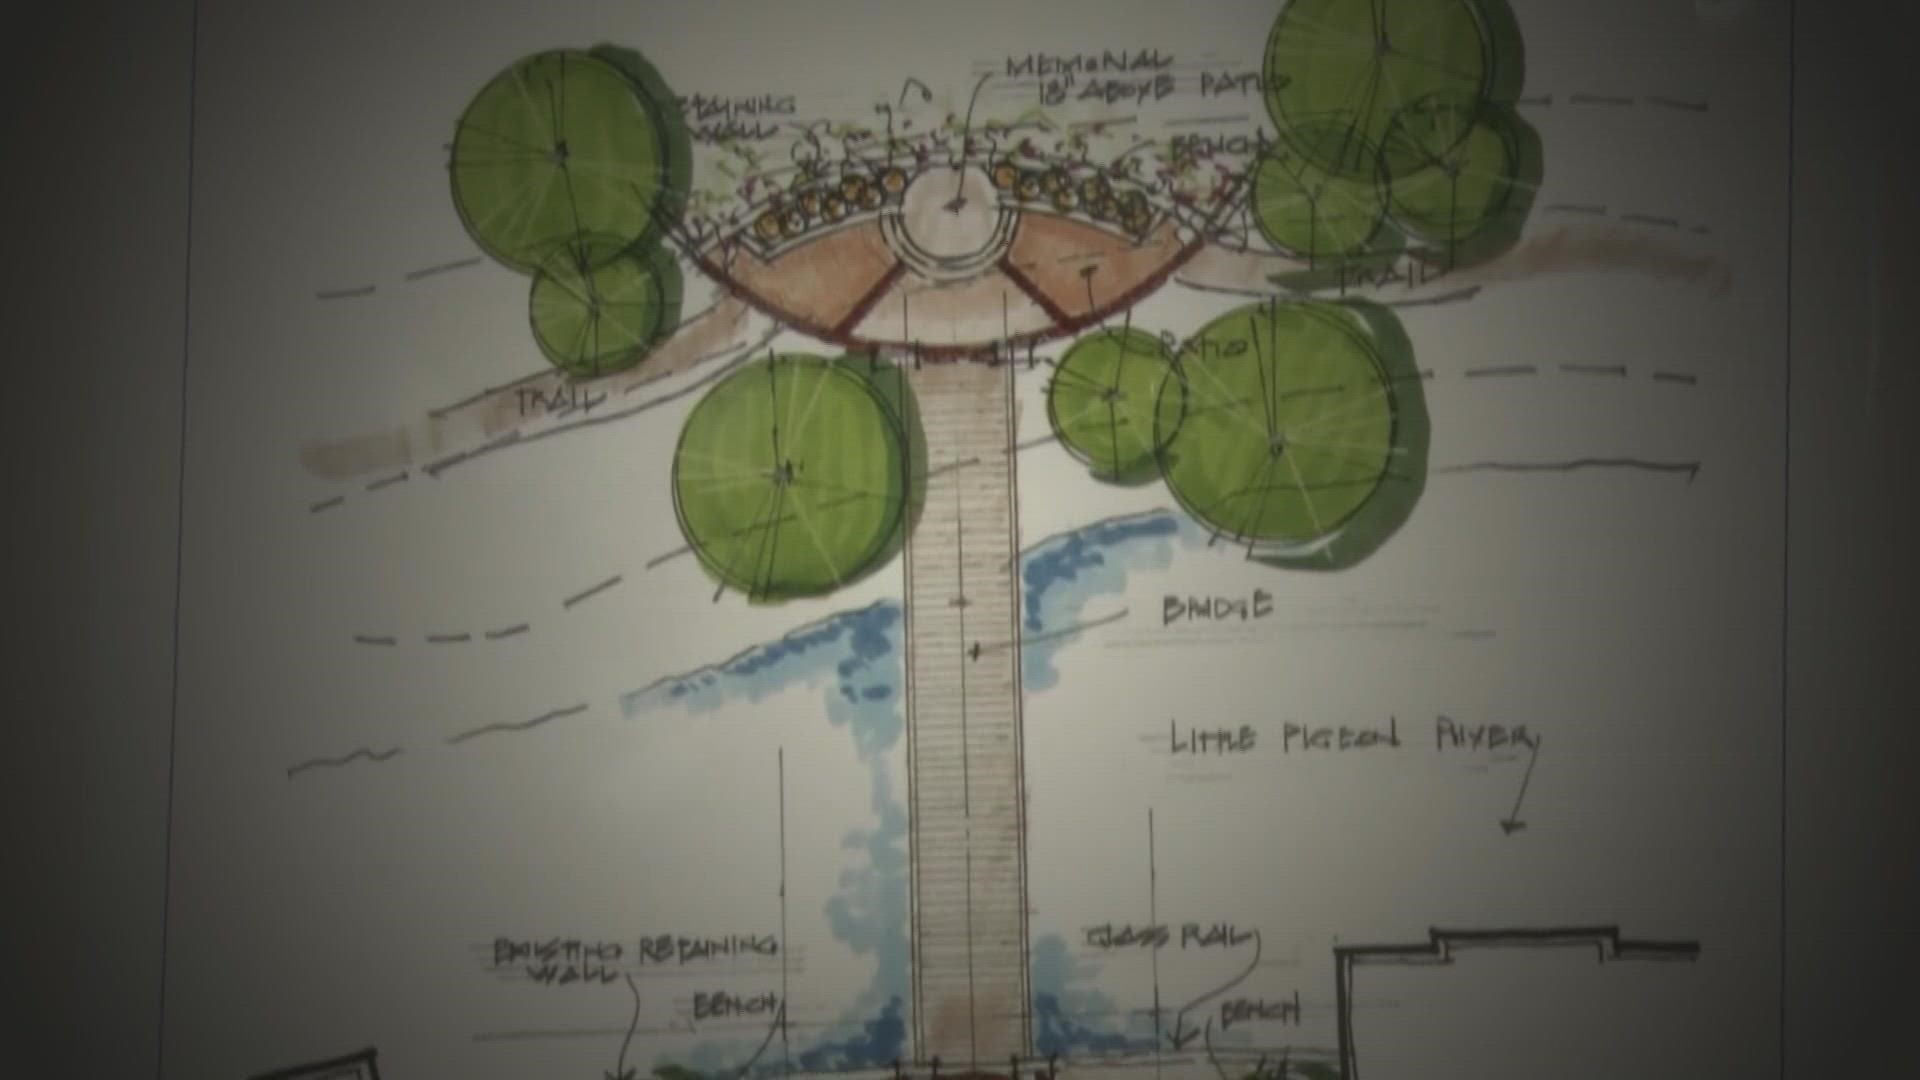 TDOT said it concurred with using Whaley Construction as the contractor to build the memorial, at around $919,300.